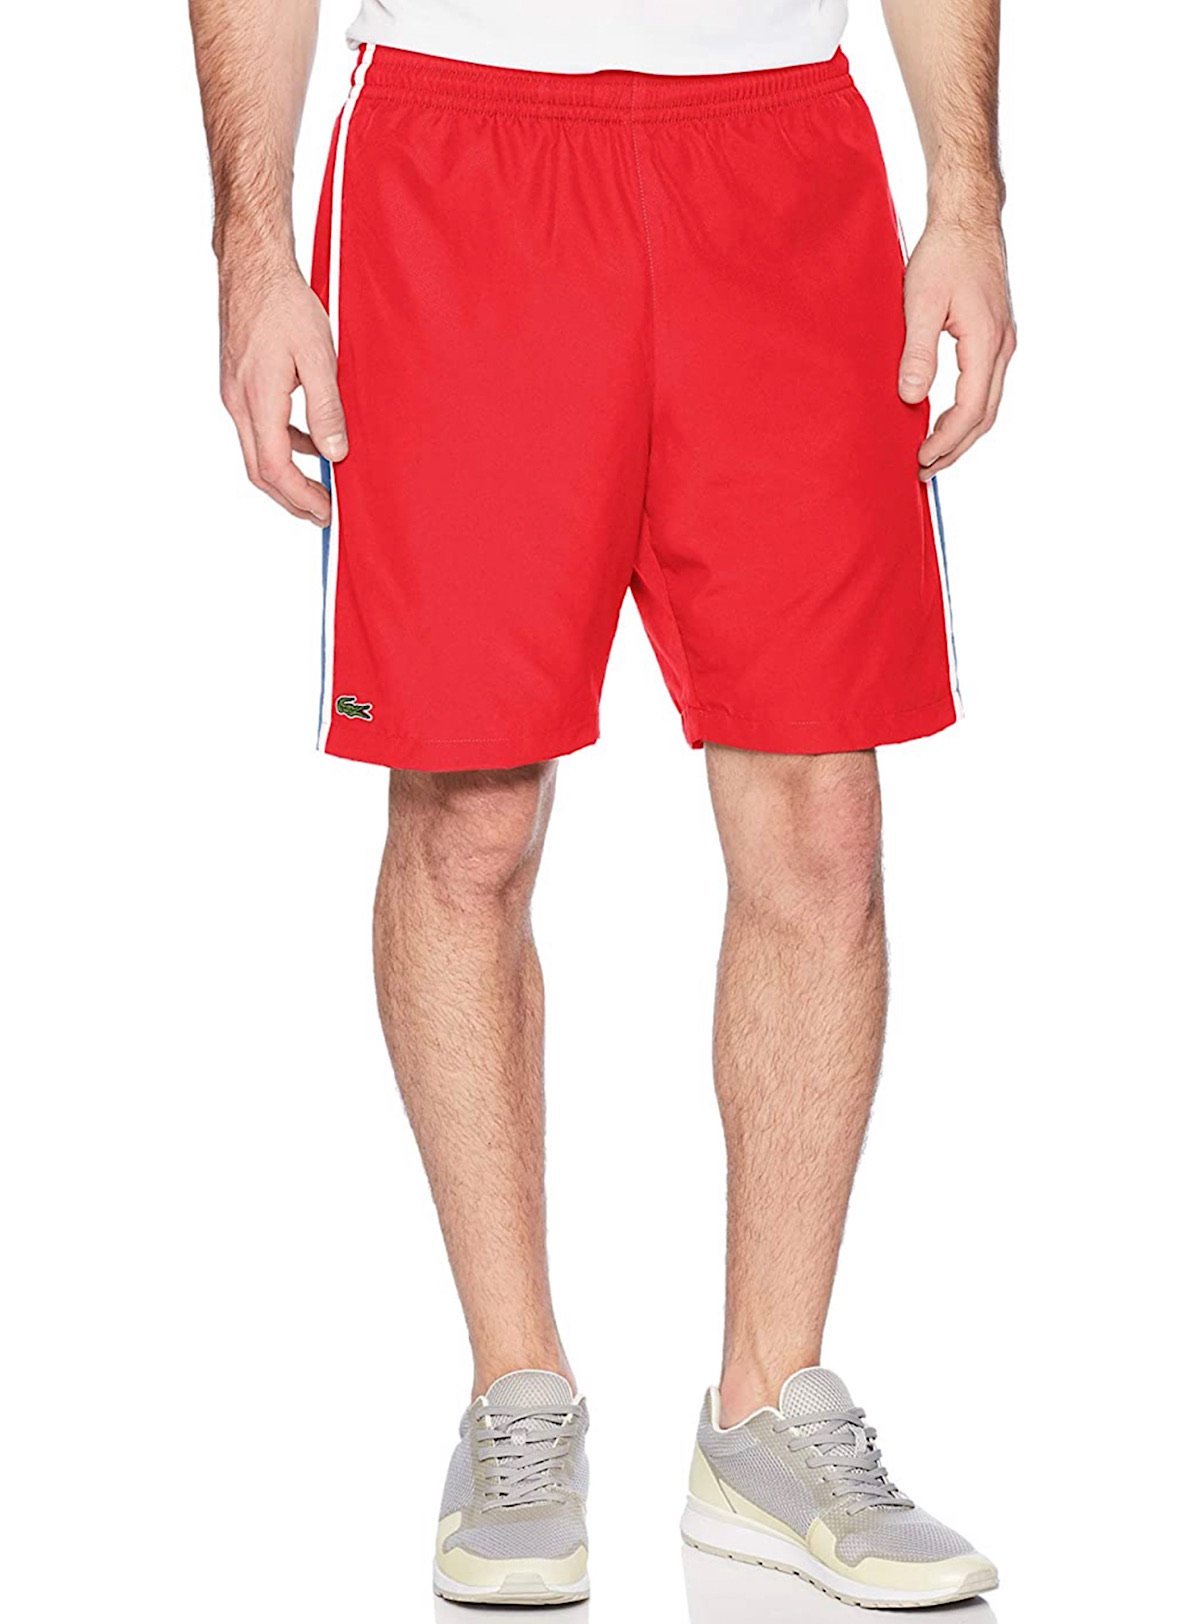 red lacoste shorts